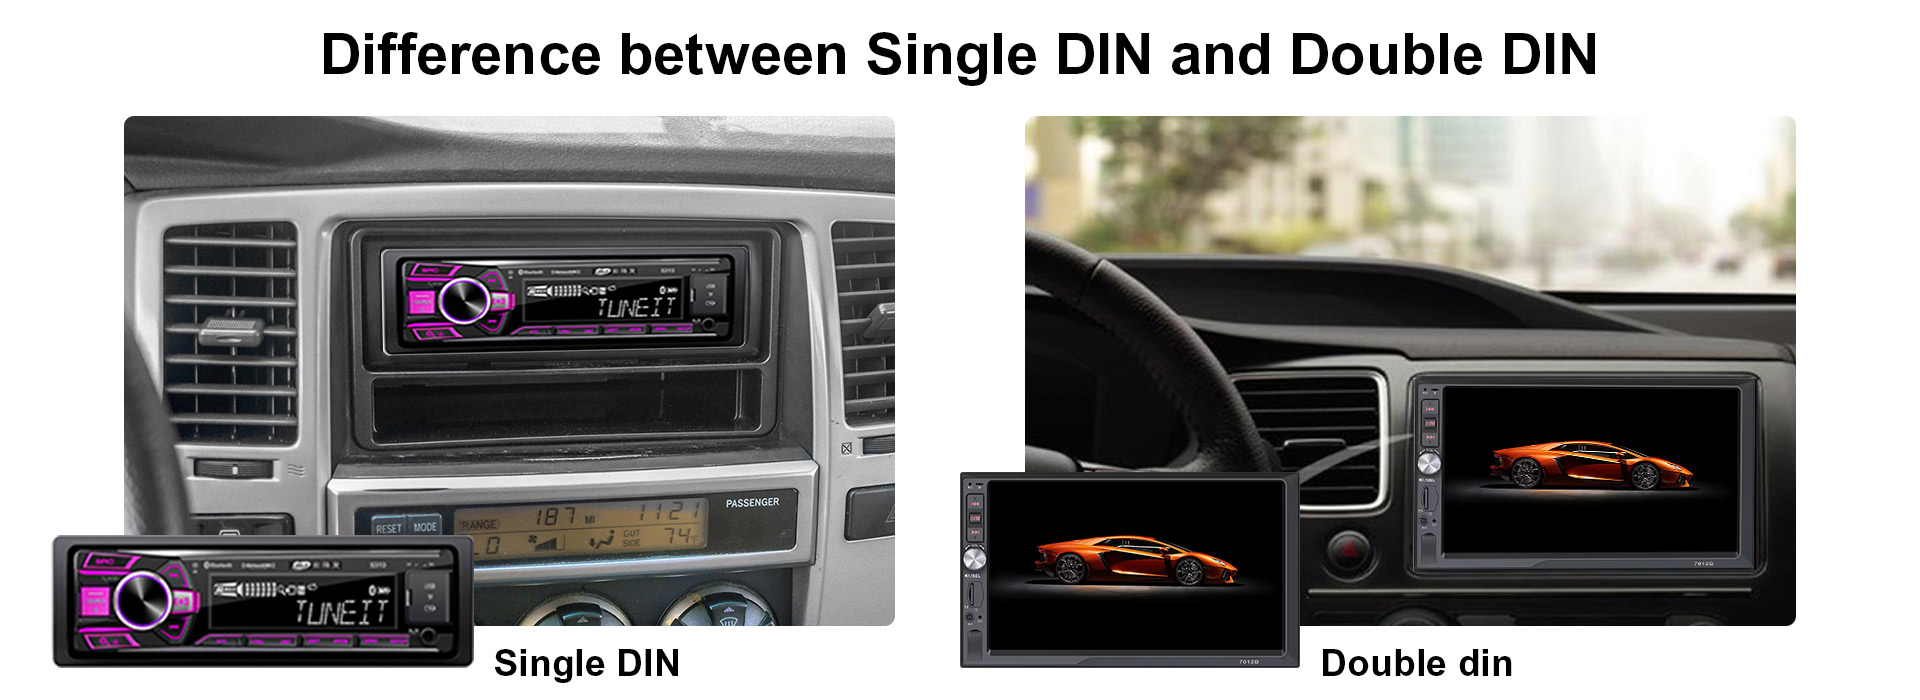 Difference between Single DIN and Double DIN